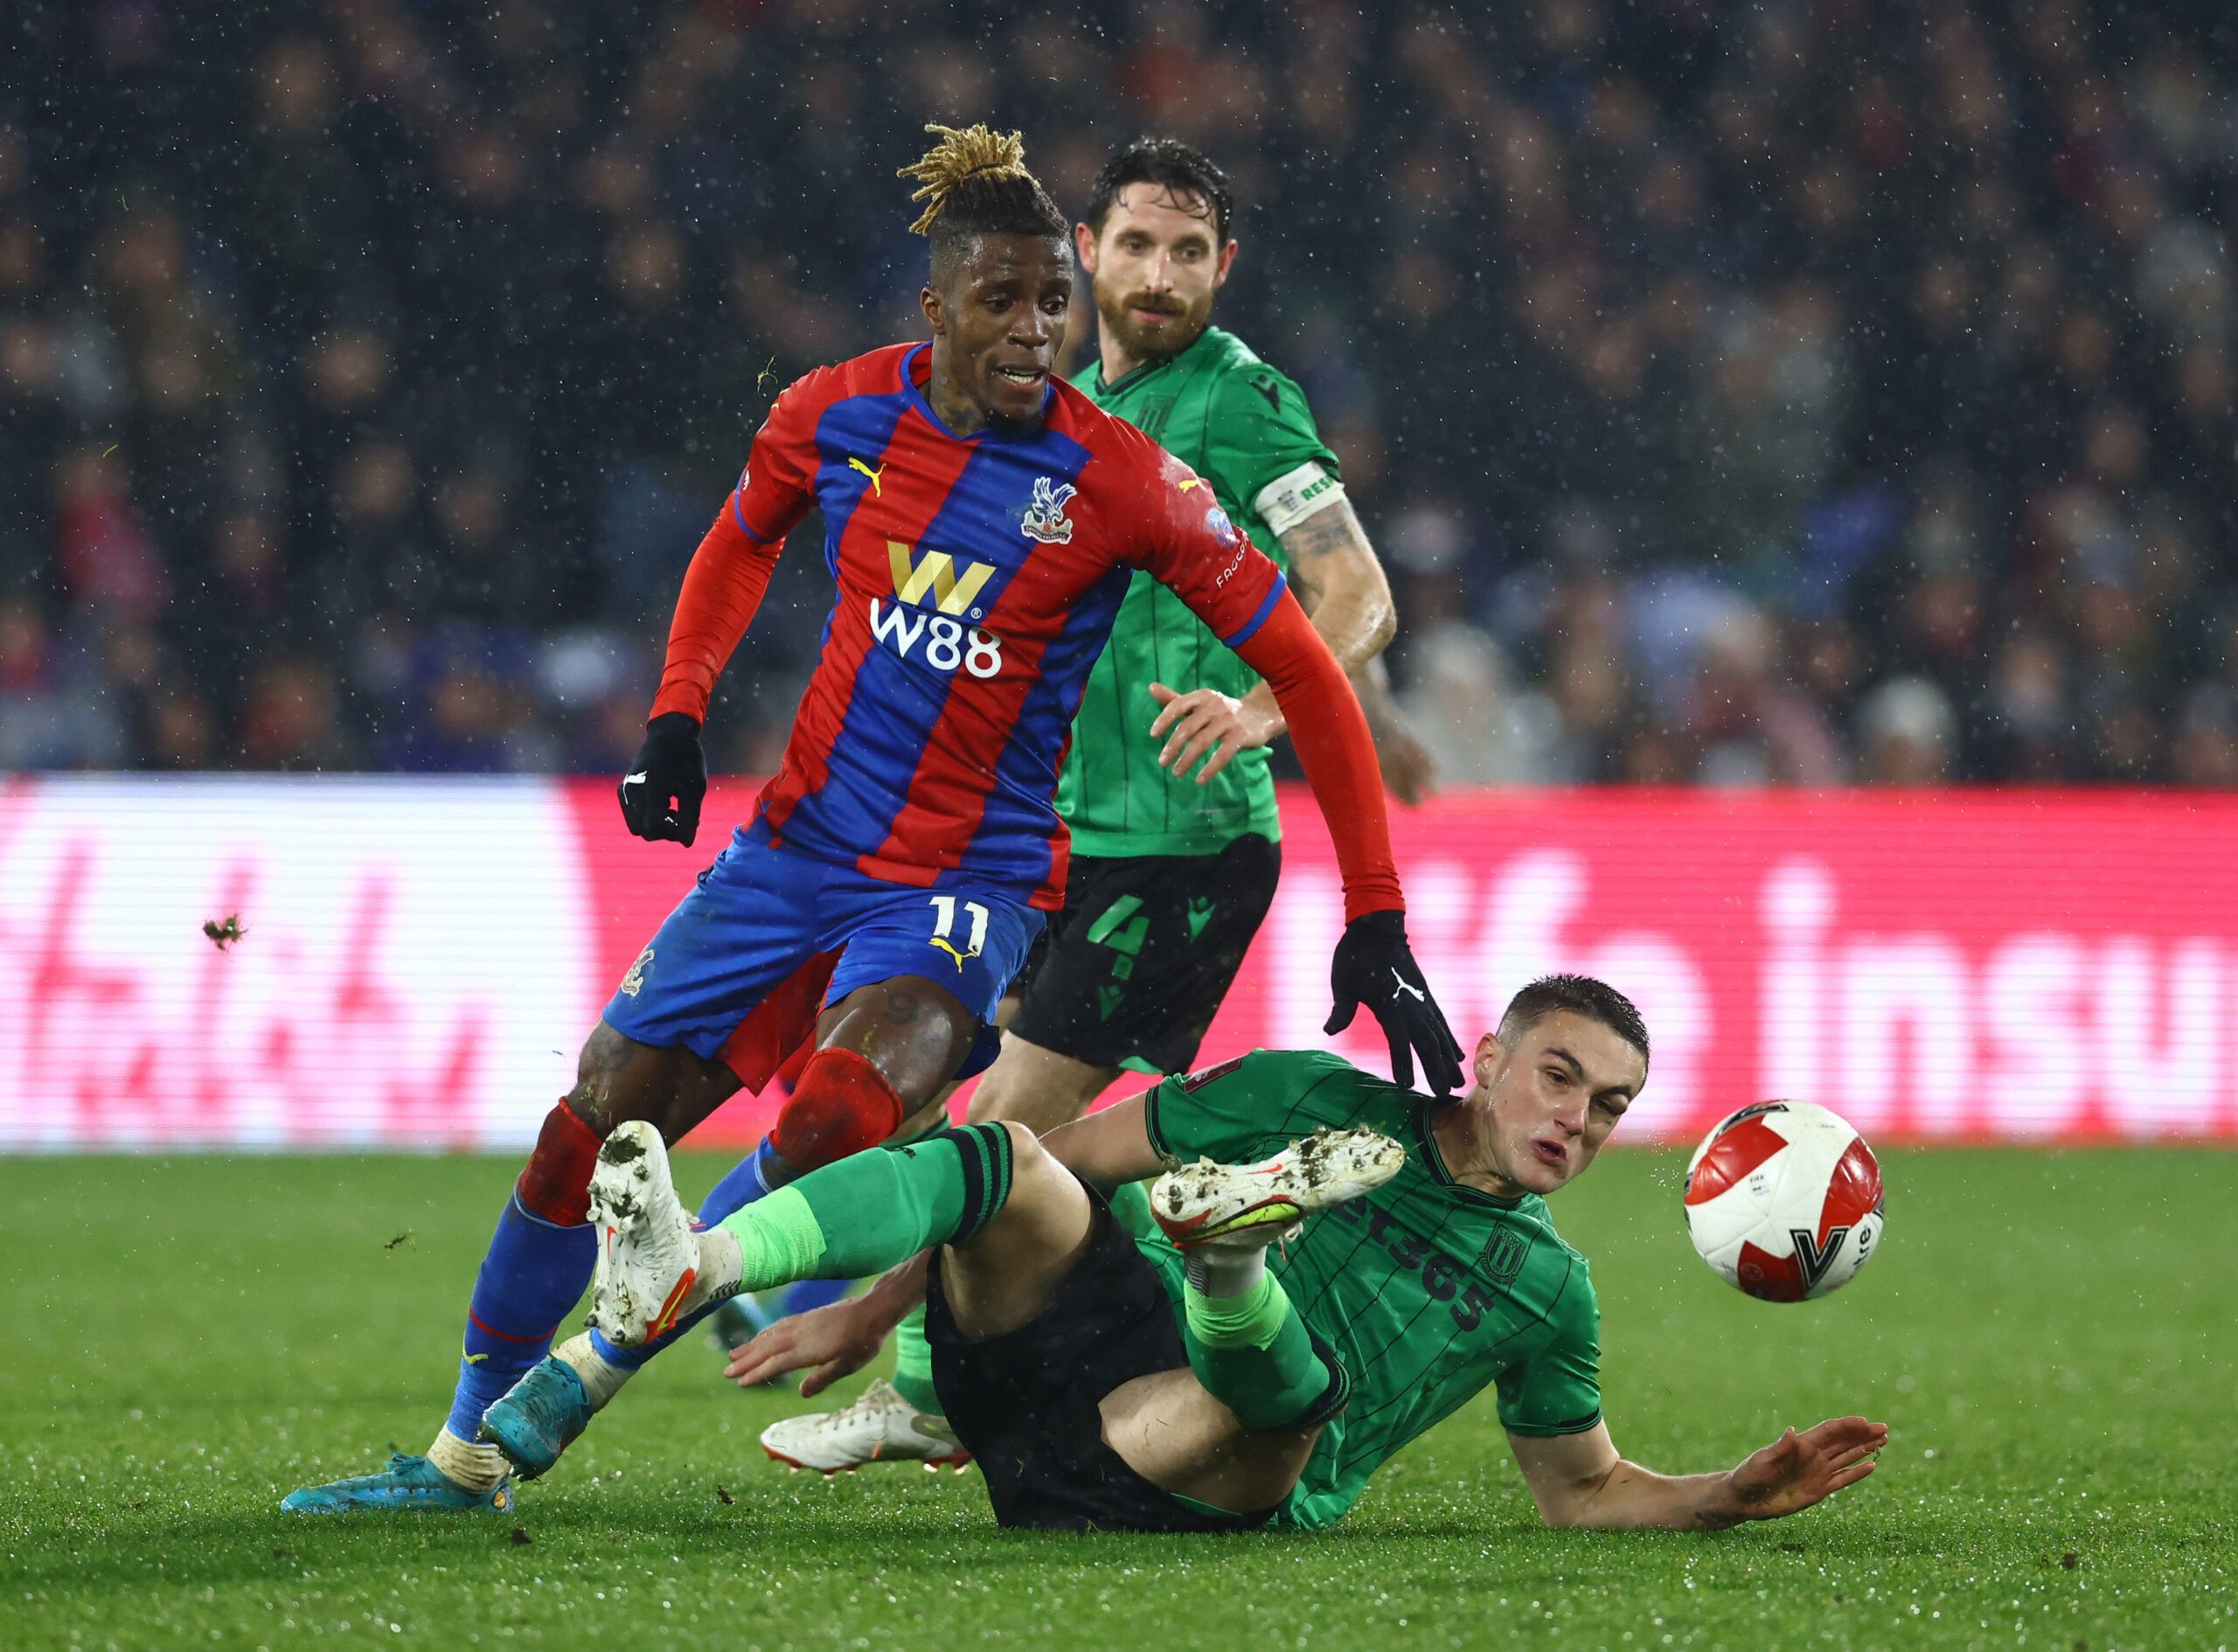 Soccer Football - FA Cup Fifth Round - Crystal Palace v Stoke City - Selhurst Park, London, Britain - March 1, 2022 Crystal Palace's Wilfried Zaha in action with Stoke City's Taylor Harwood-Bellis REUTERS/David Klein